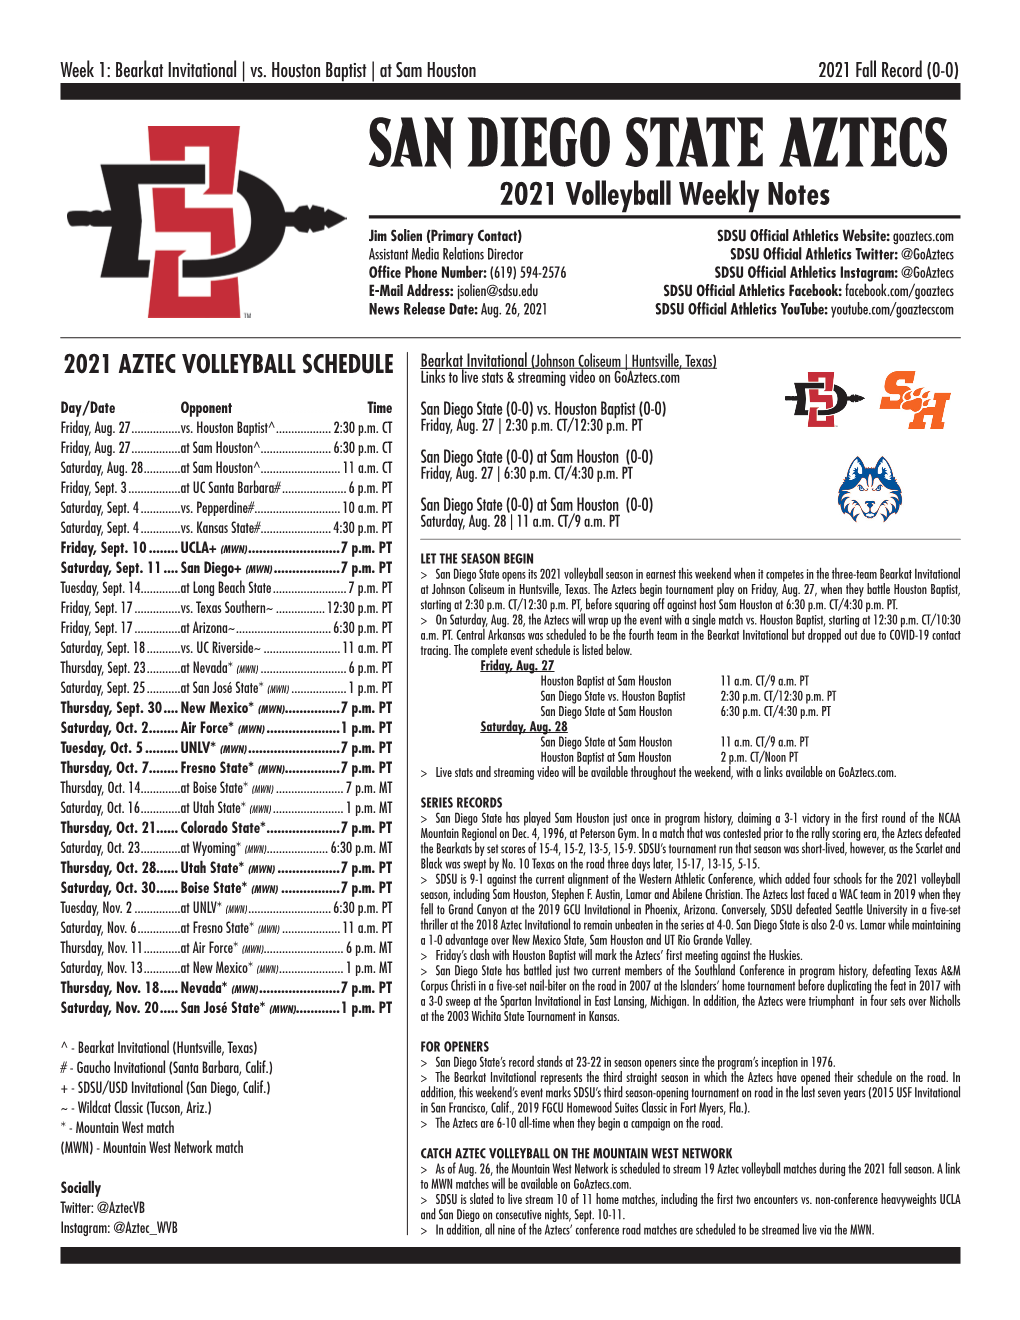 SAN DIEGO STATE AZTECS 2021 Volleyball Weekly Notes